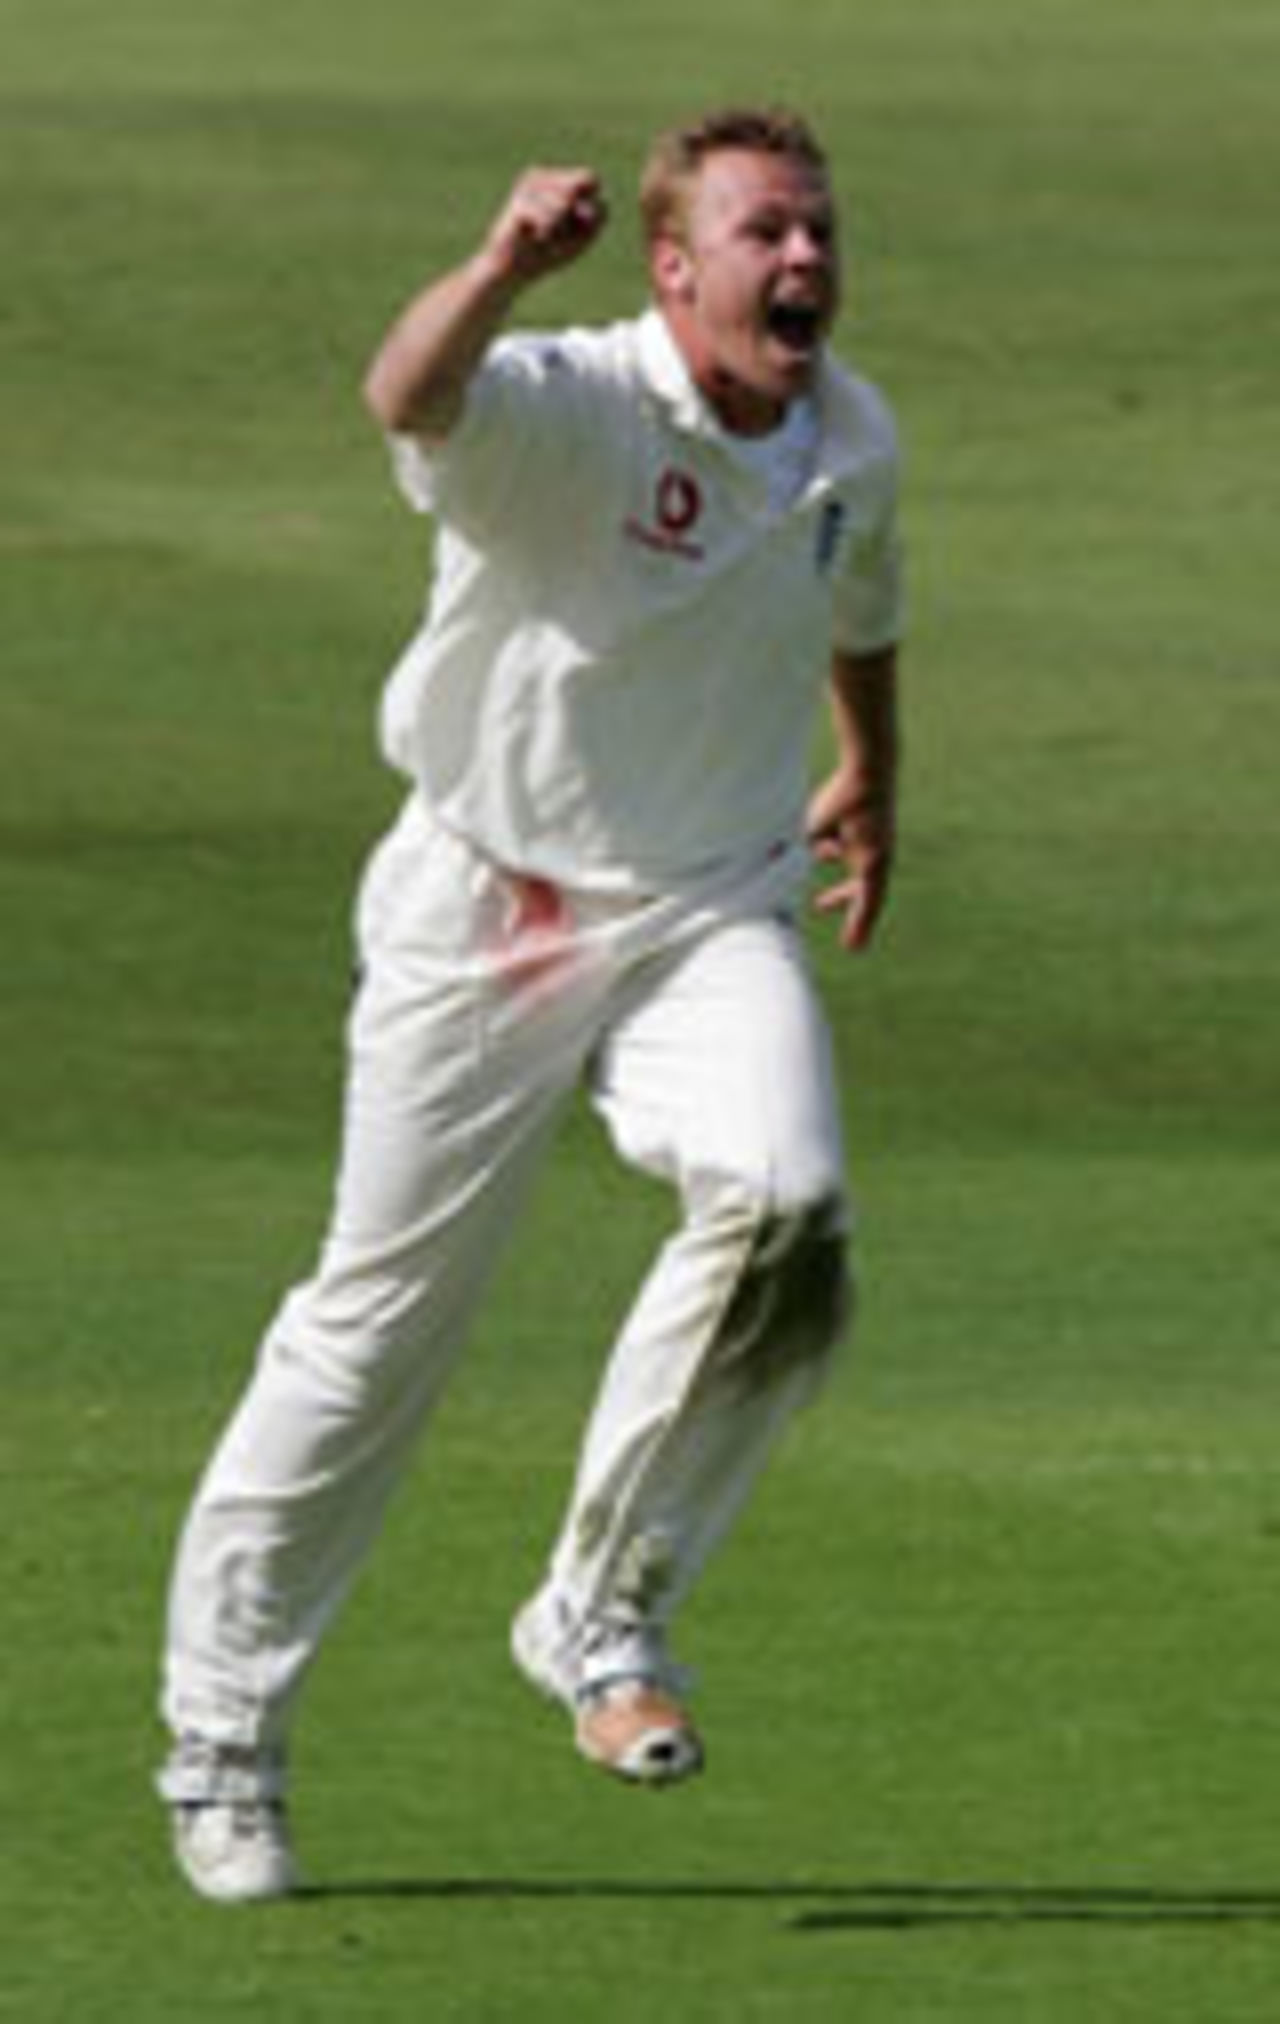 Martin Saggers celebrates the wicket of Nathan Astle, England v New Zealand, 2nd Test, Headingley, June 4, 2004